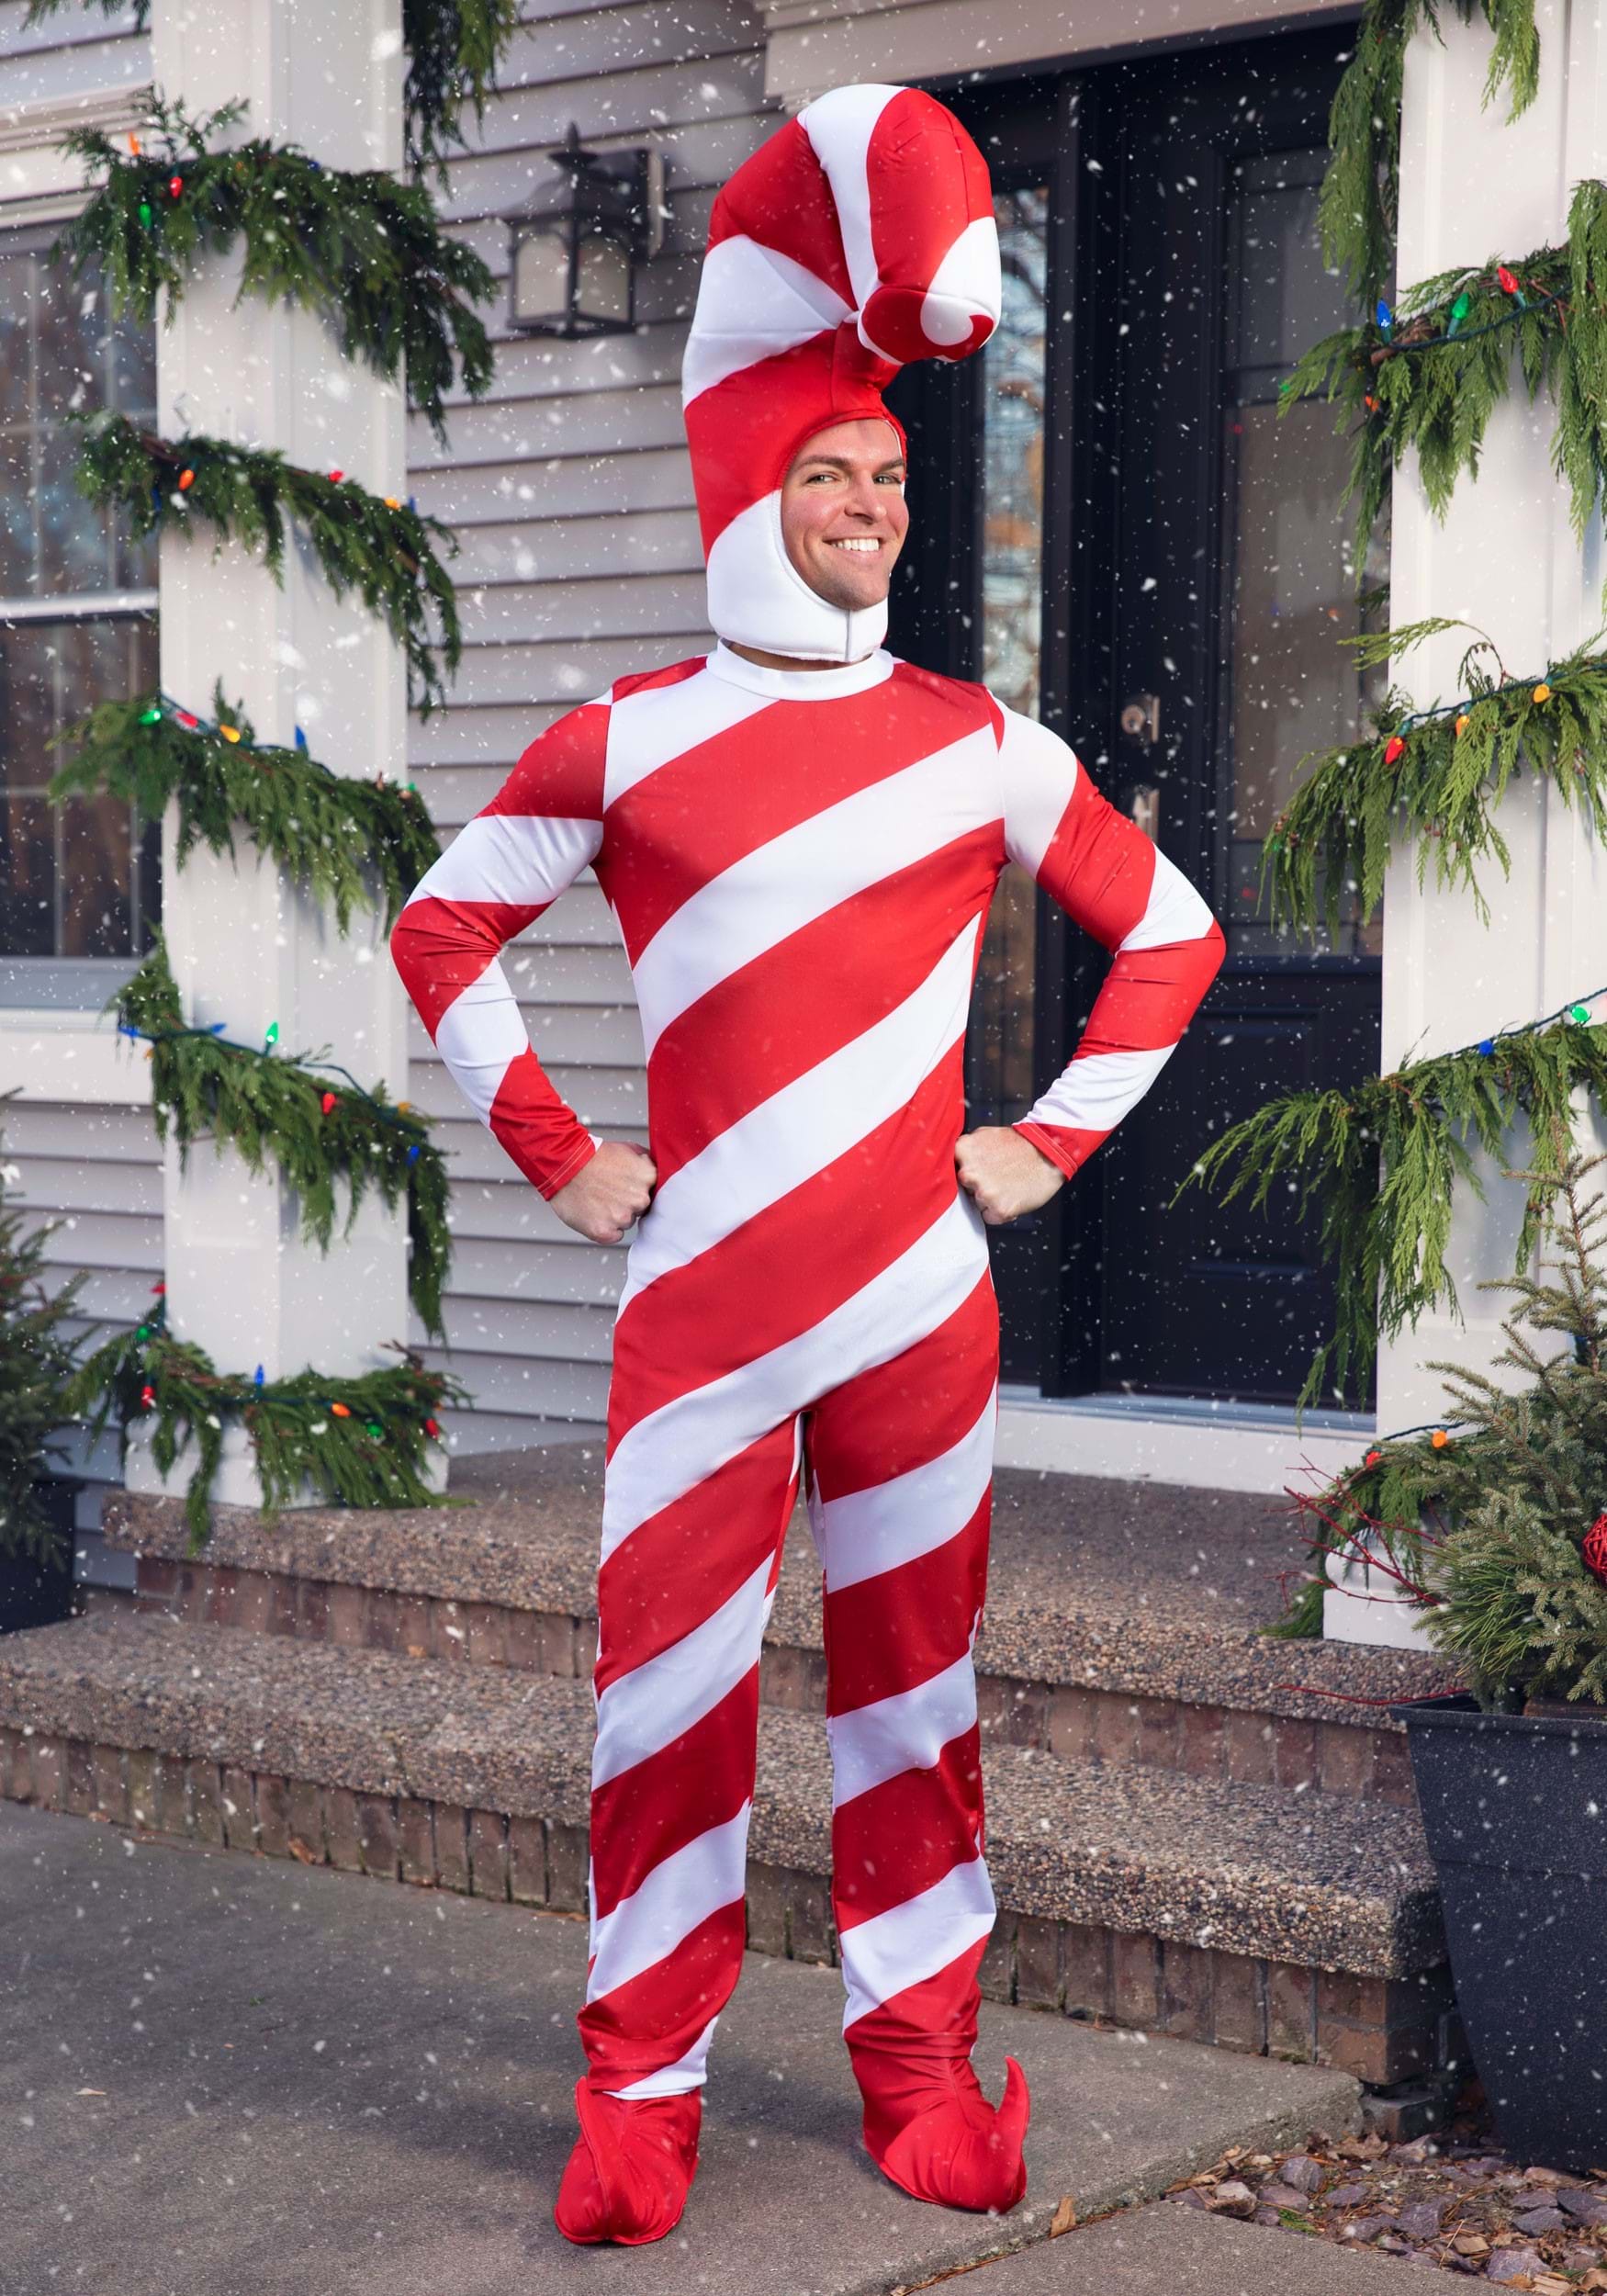 Candy cane costume